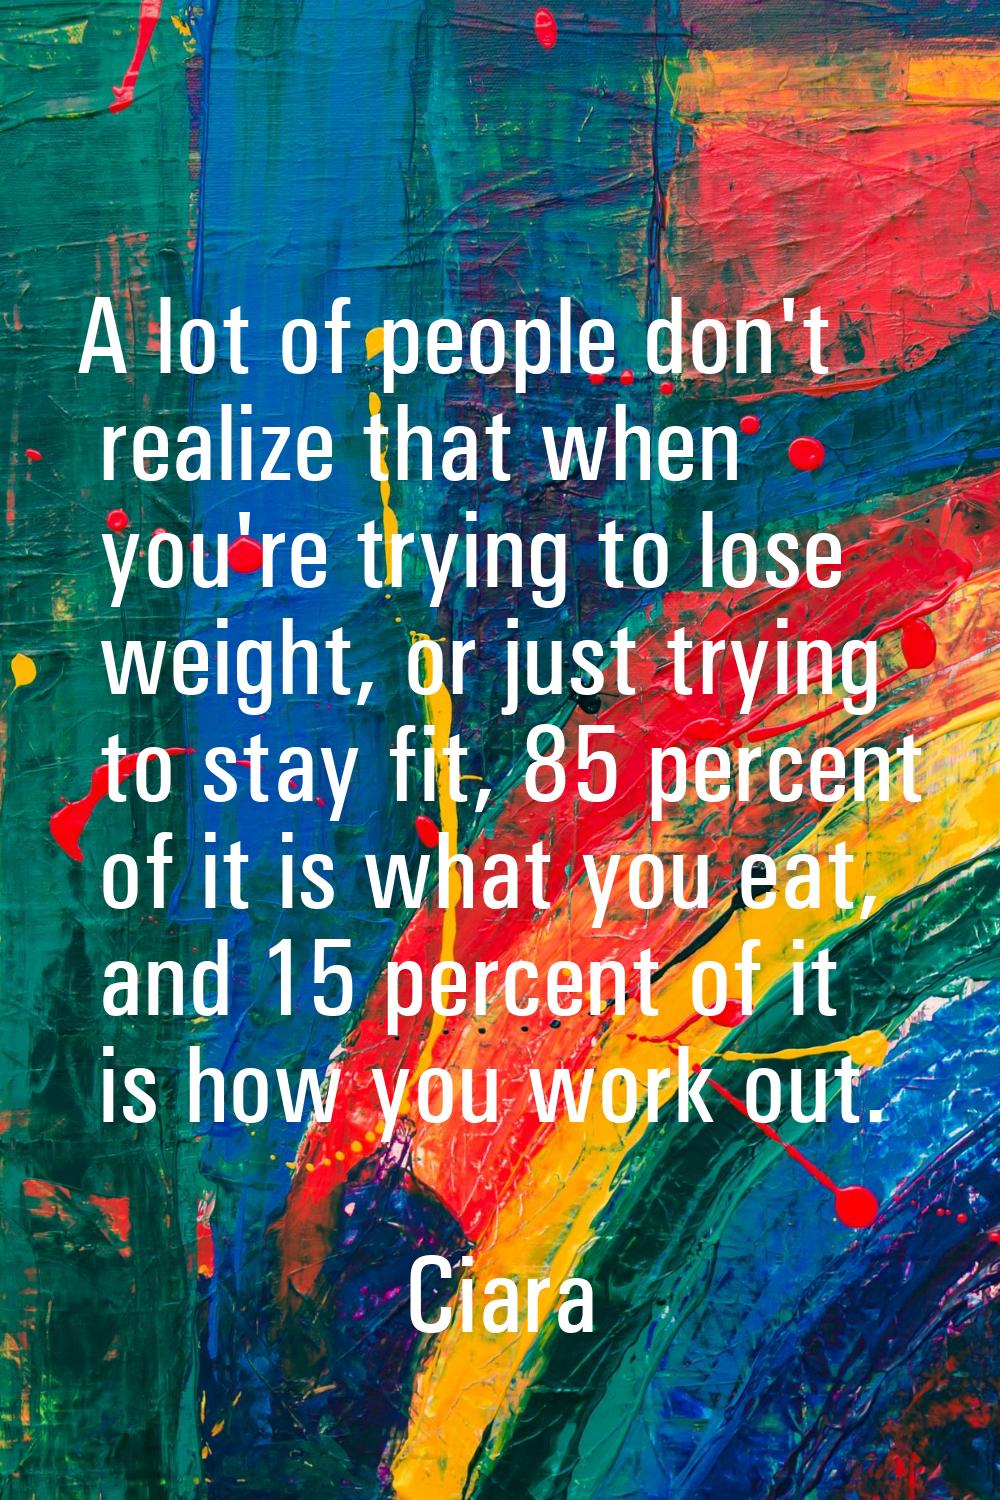 A lot of people don't realize that when you're trying to lose weight, or just trying to stay fit, 8